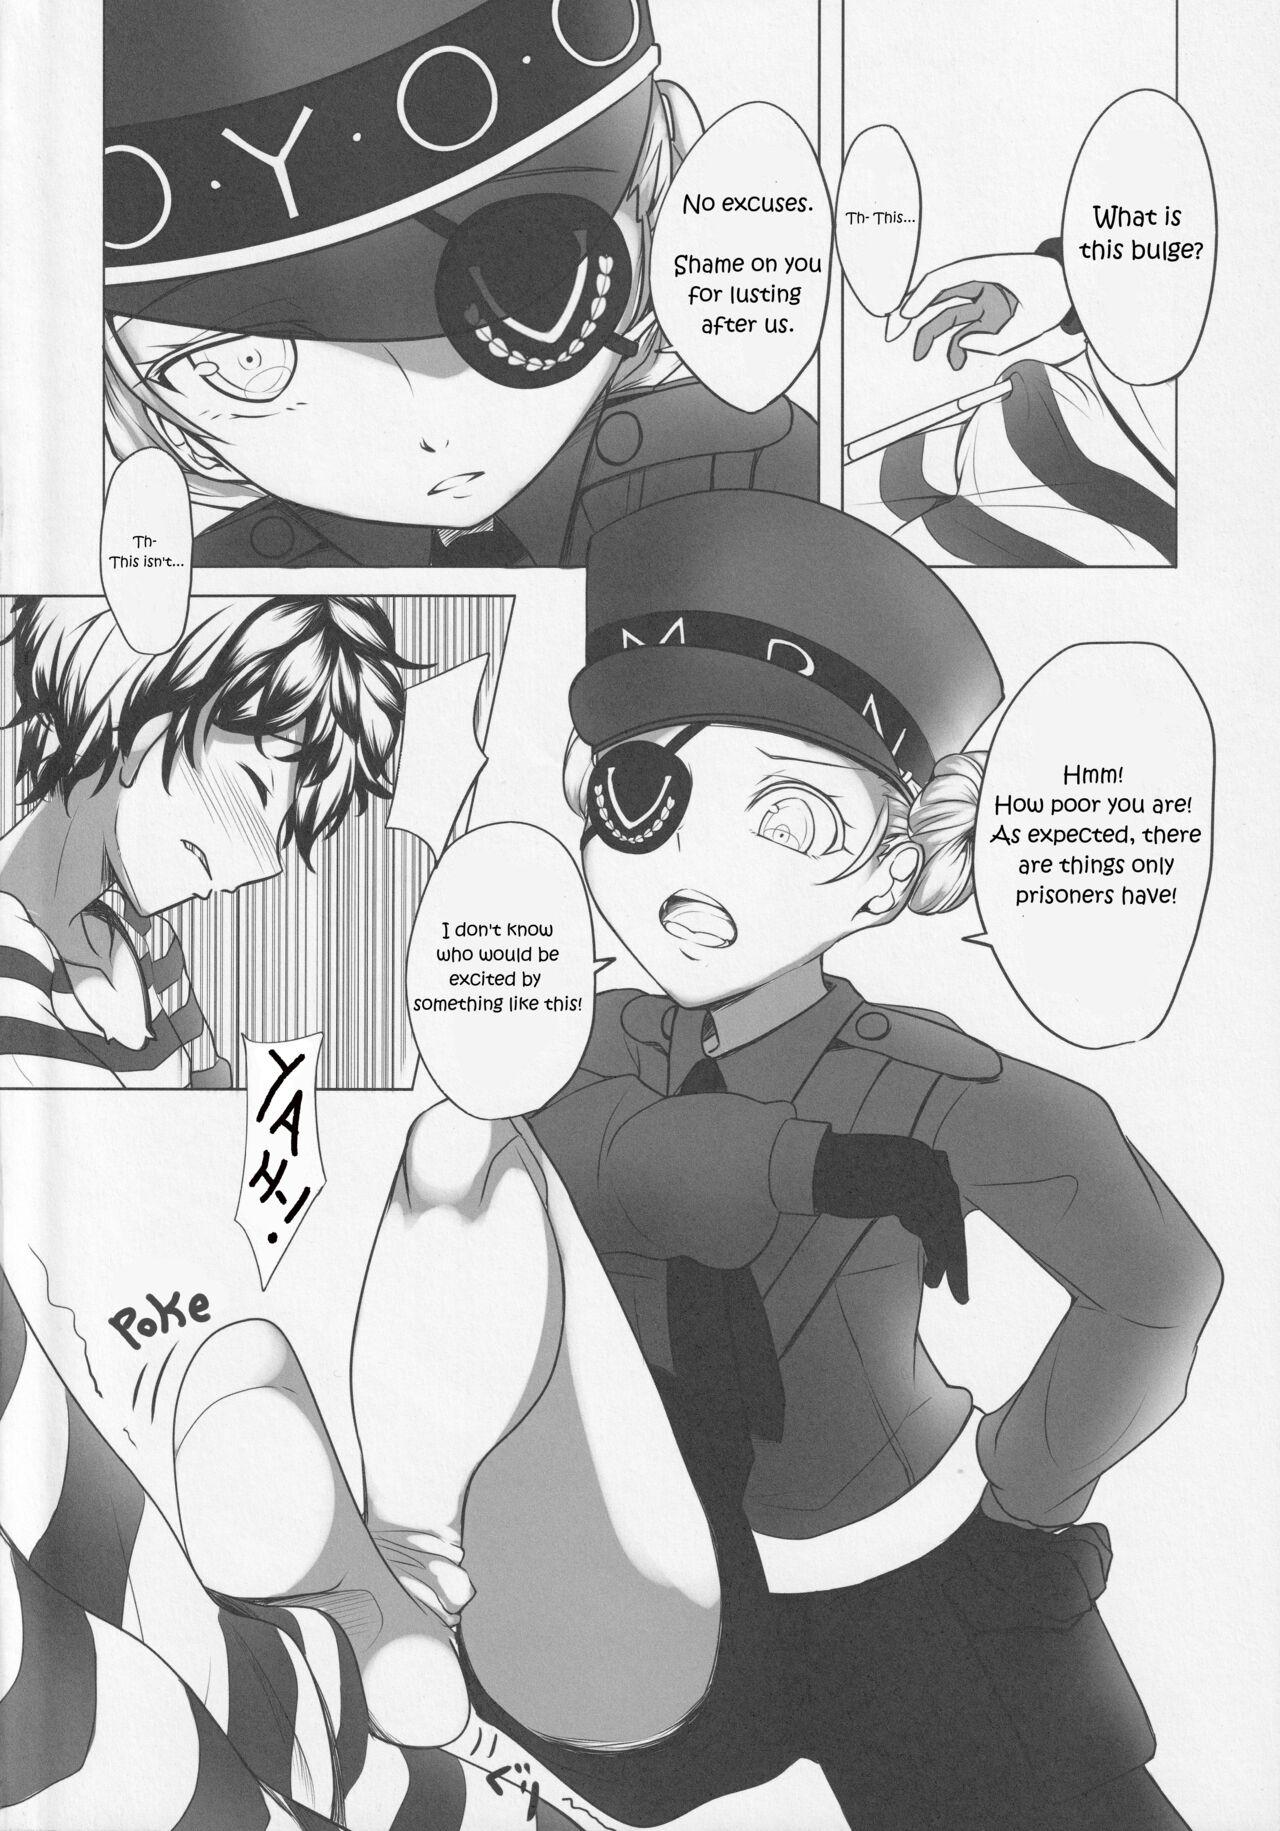 Pussy Fucking Sounds Like You Need a Revive! - Persona 5 Amateur - Page 3